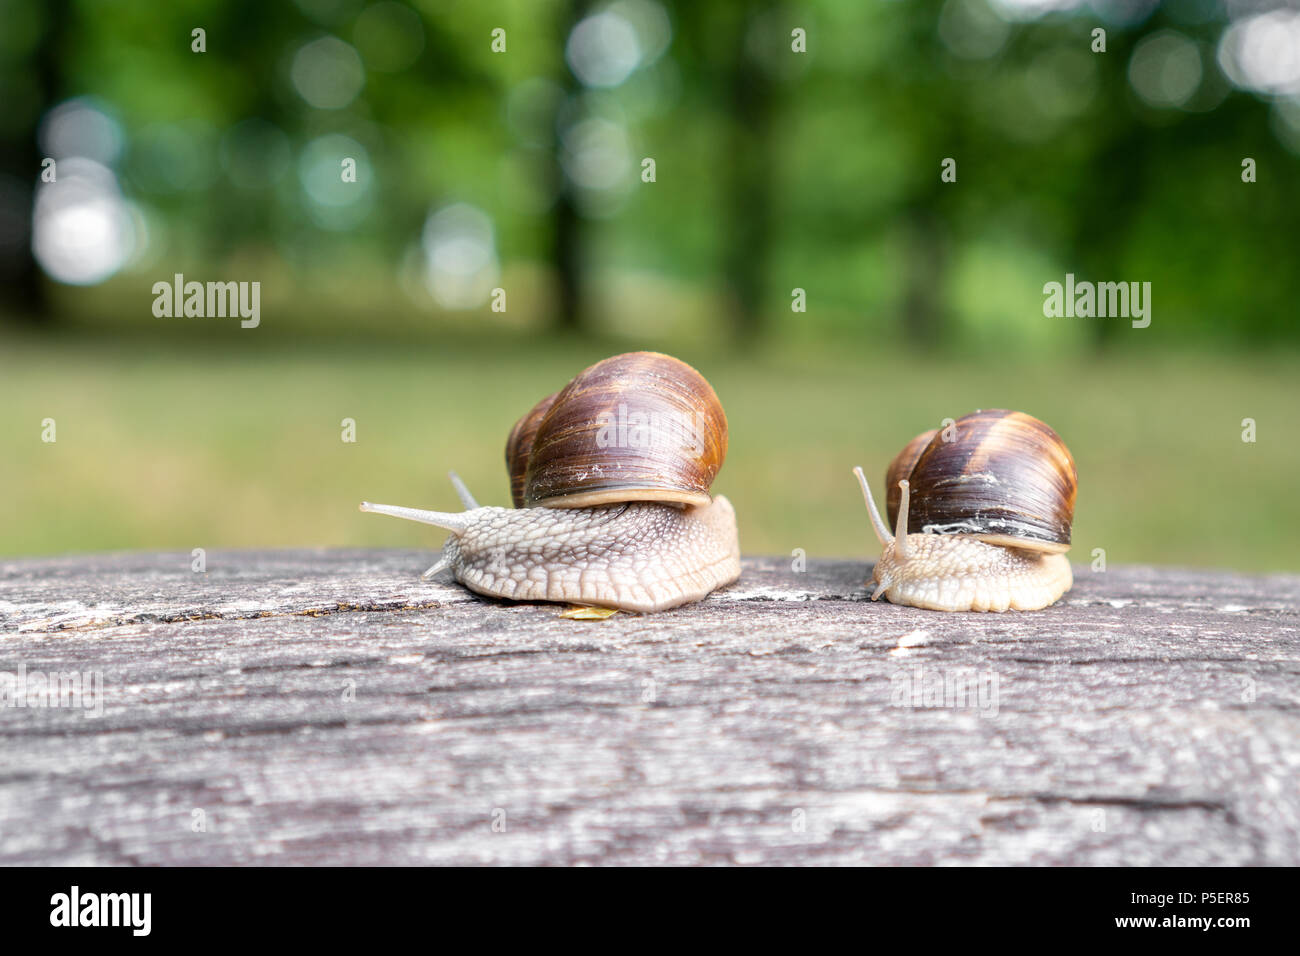 Two snails with light brown striped shell, crawling on old fallen tree Stock Photo